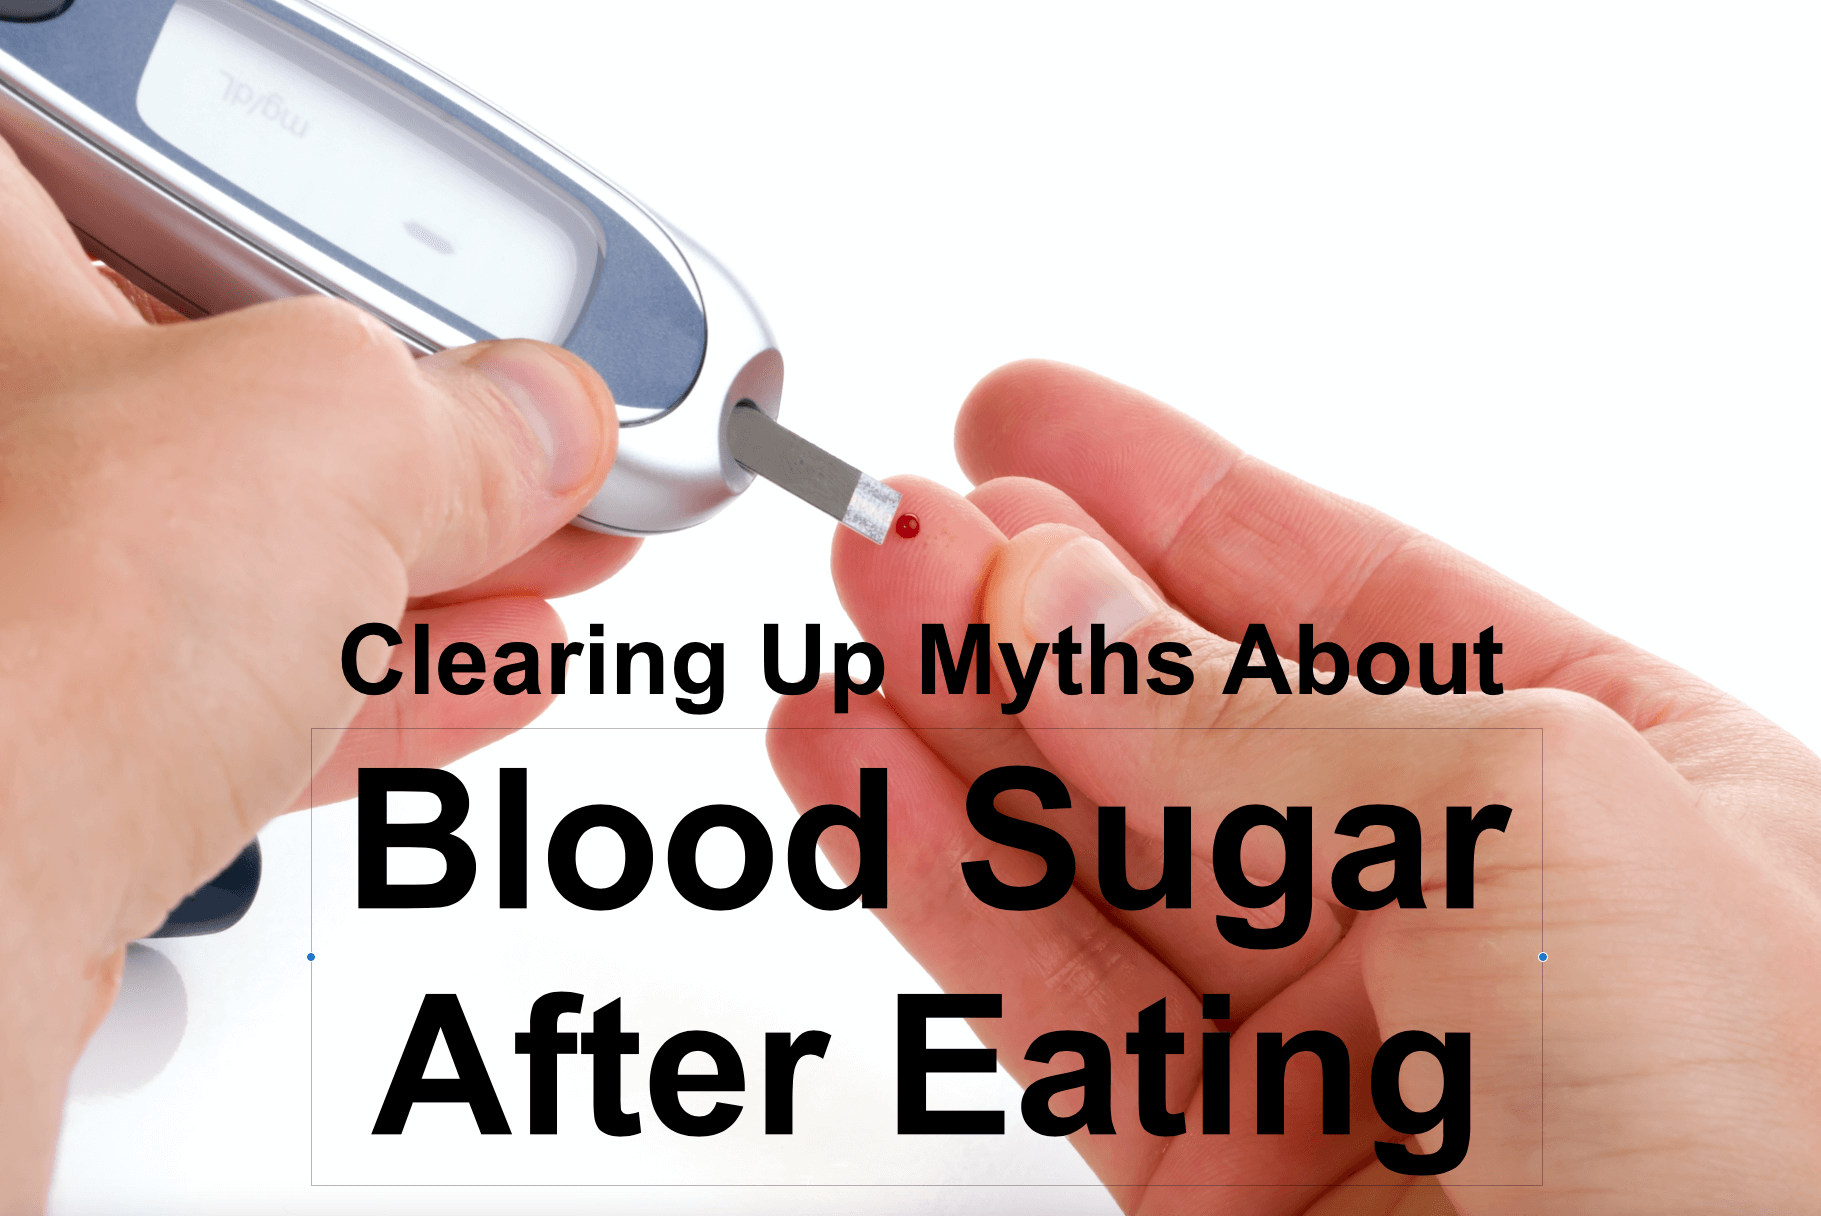 Clearing Up Myths About Blood Sugars After Eating